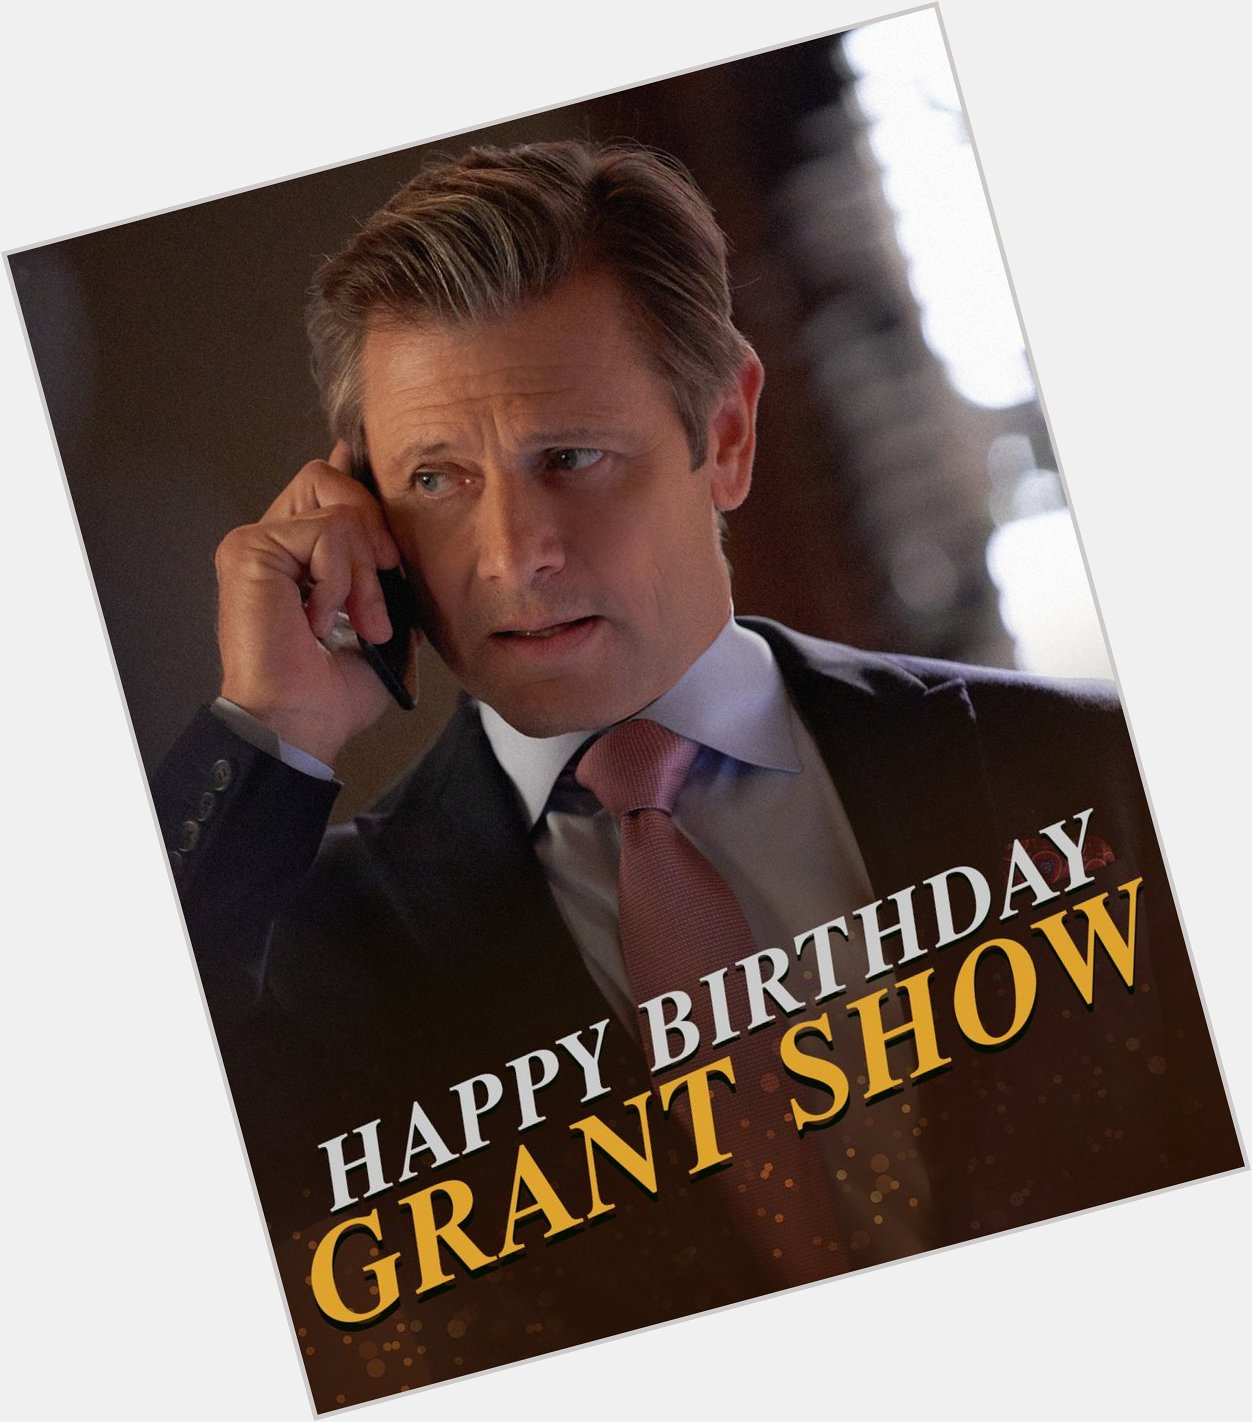 Let\s get down to business. Wish Grant Show a happy birthday! 